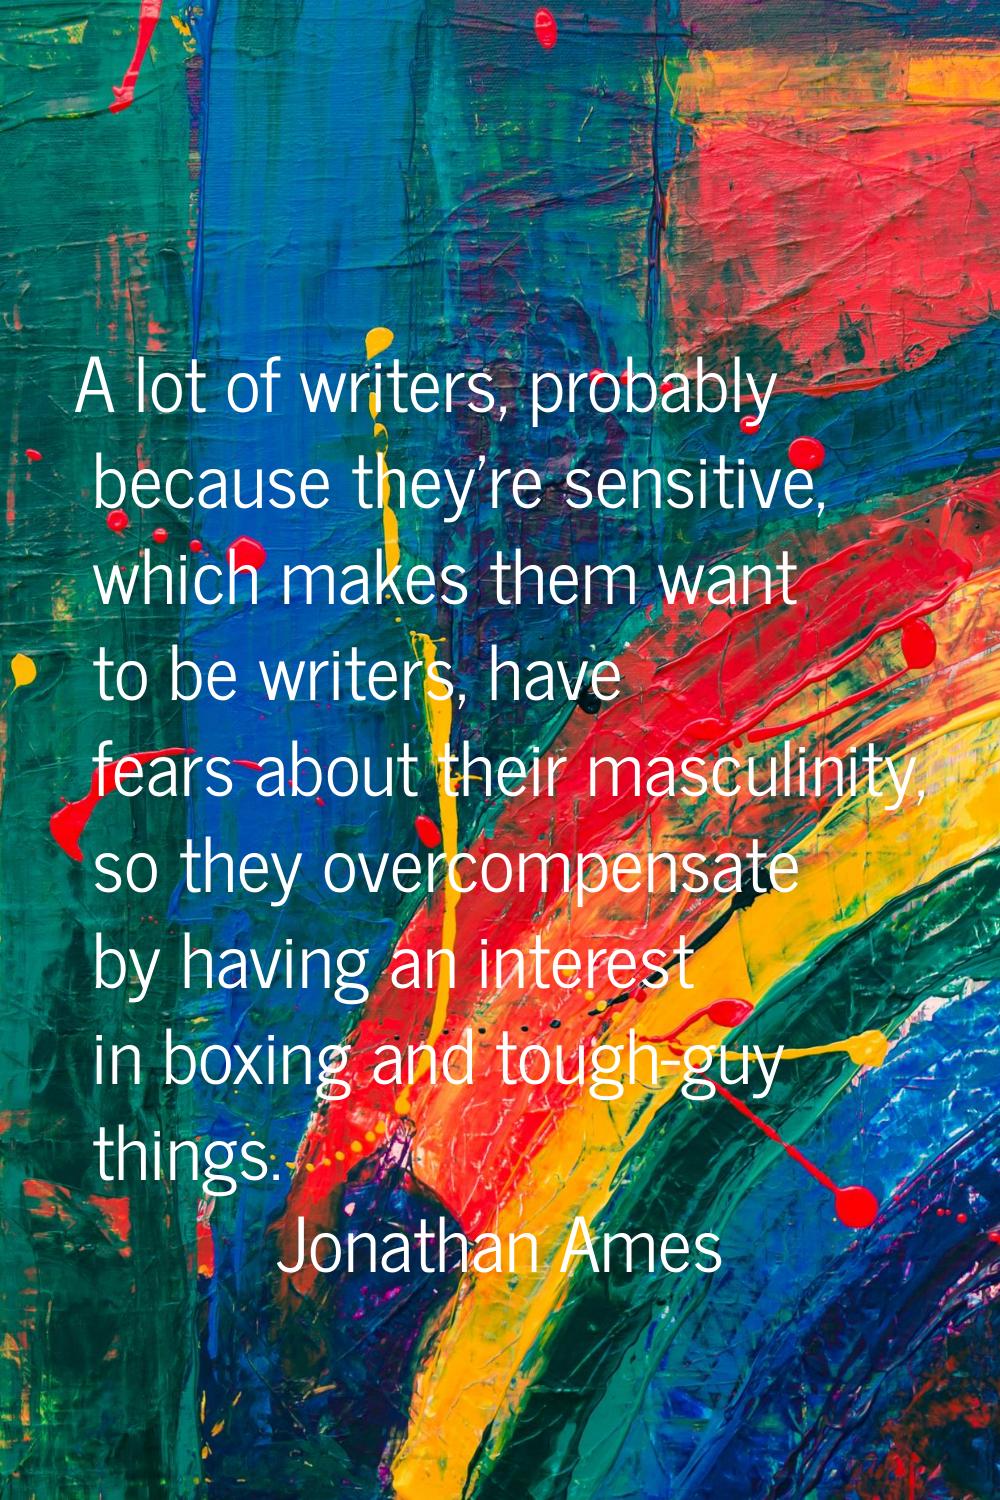 A lot of writers, probably because they're sensitive, which makes them want to be writers, have fea